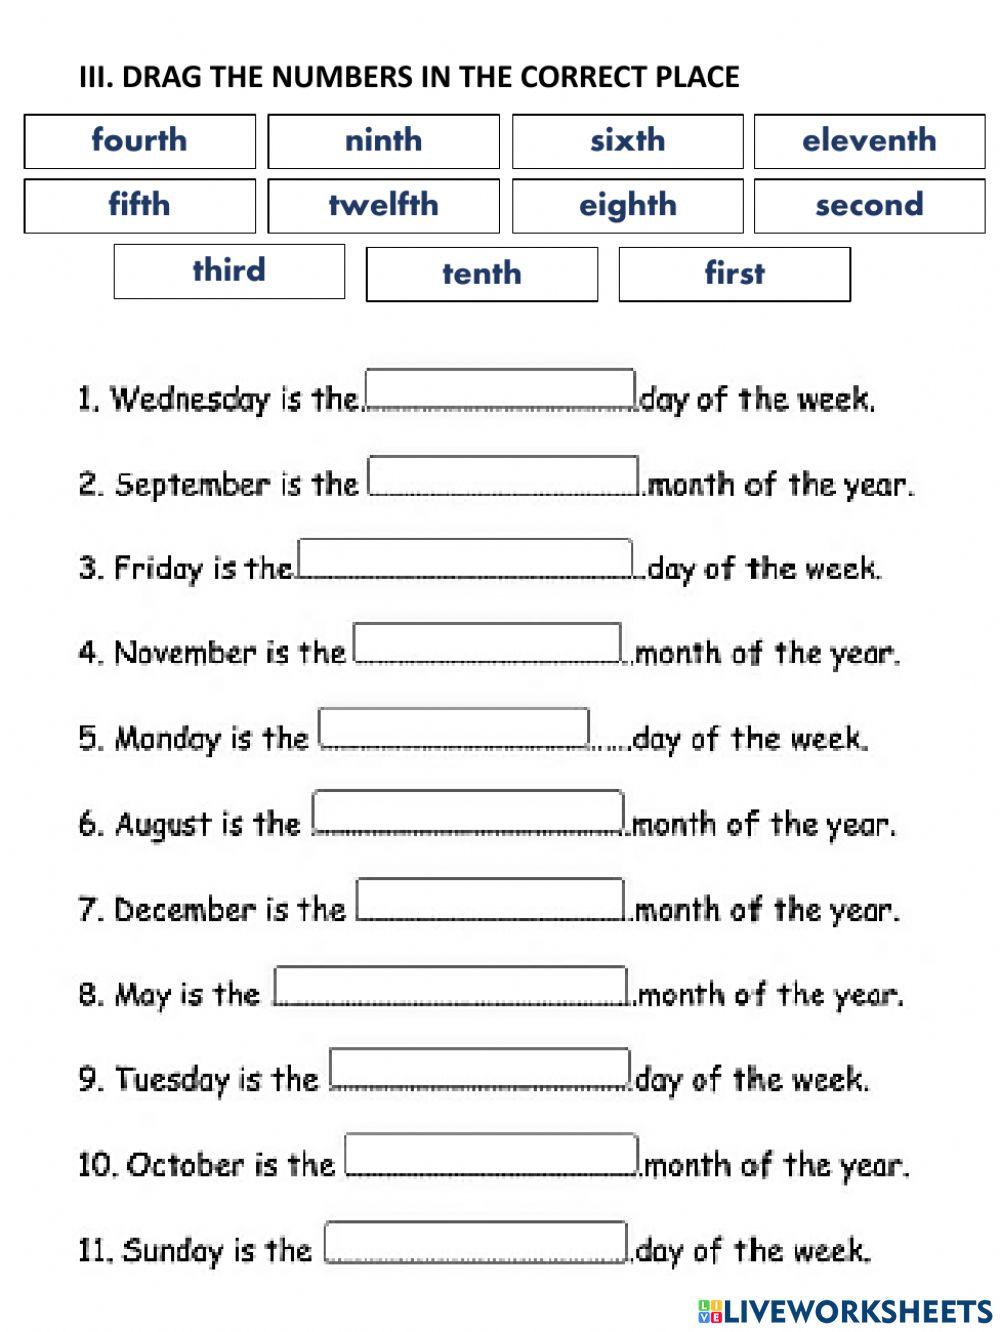 Ordinal numbers Days and months